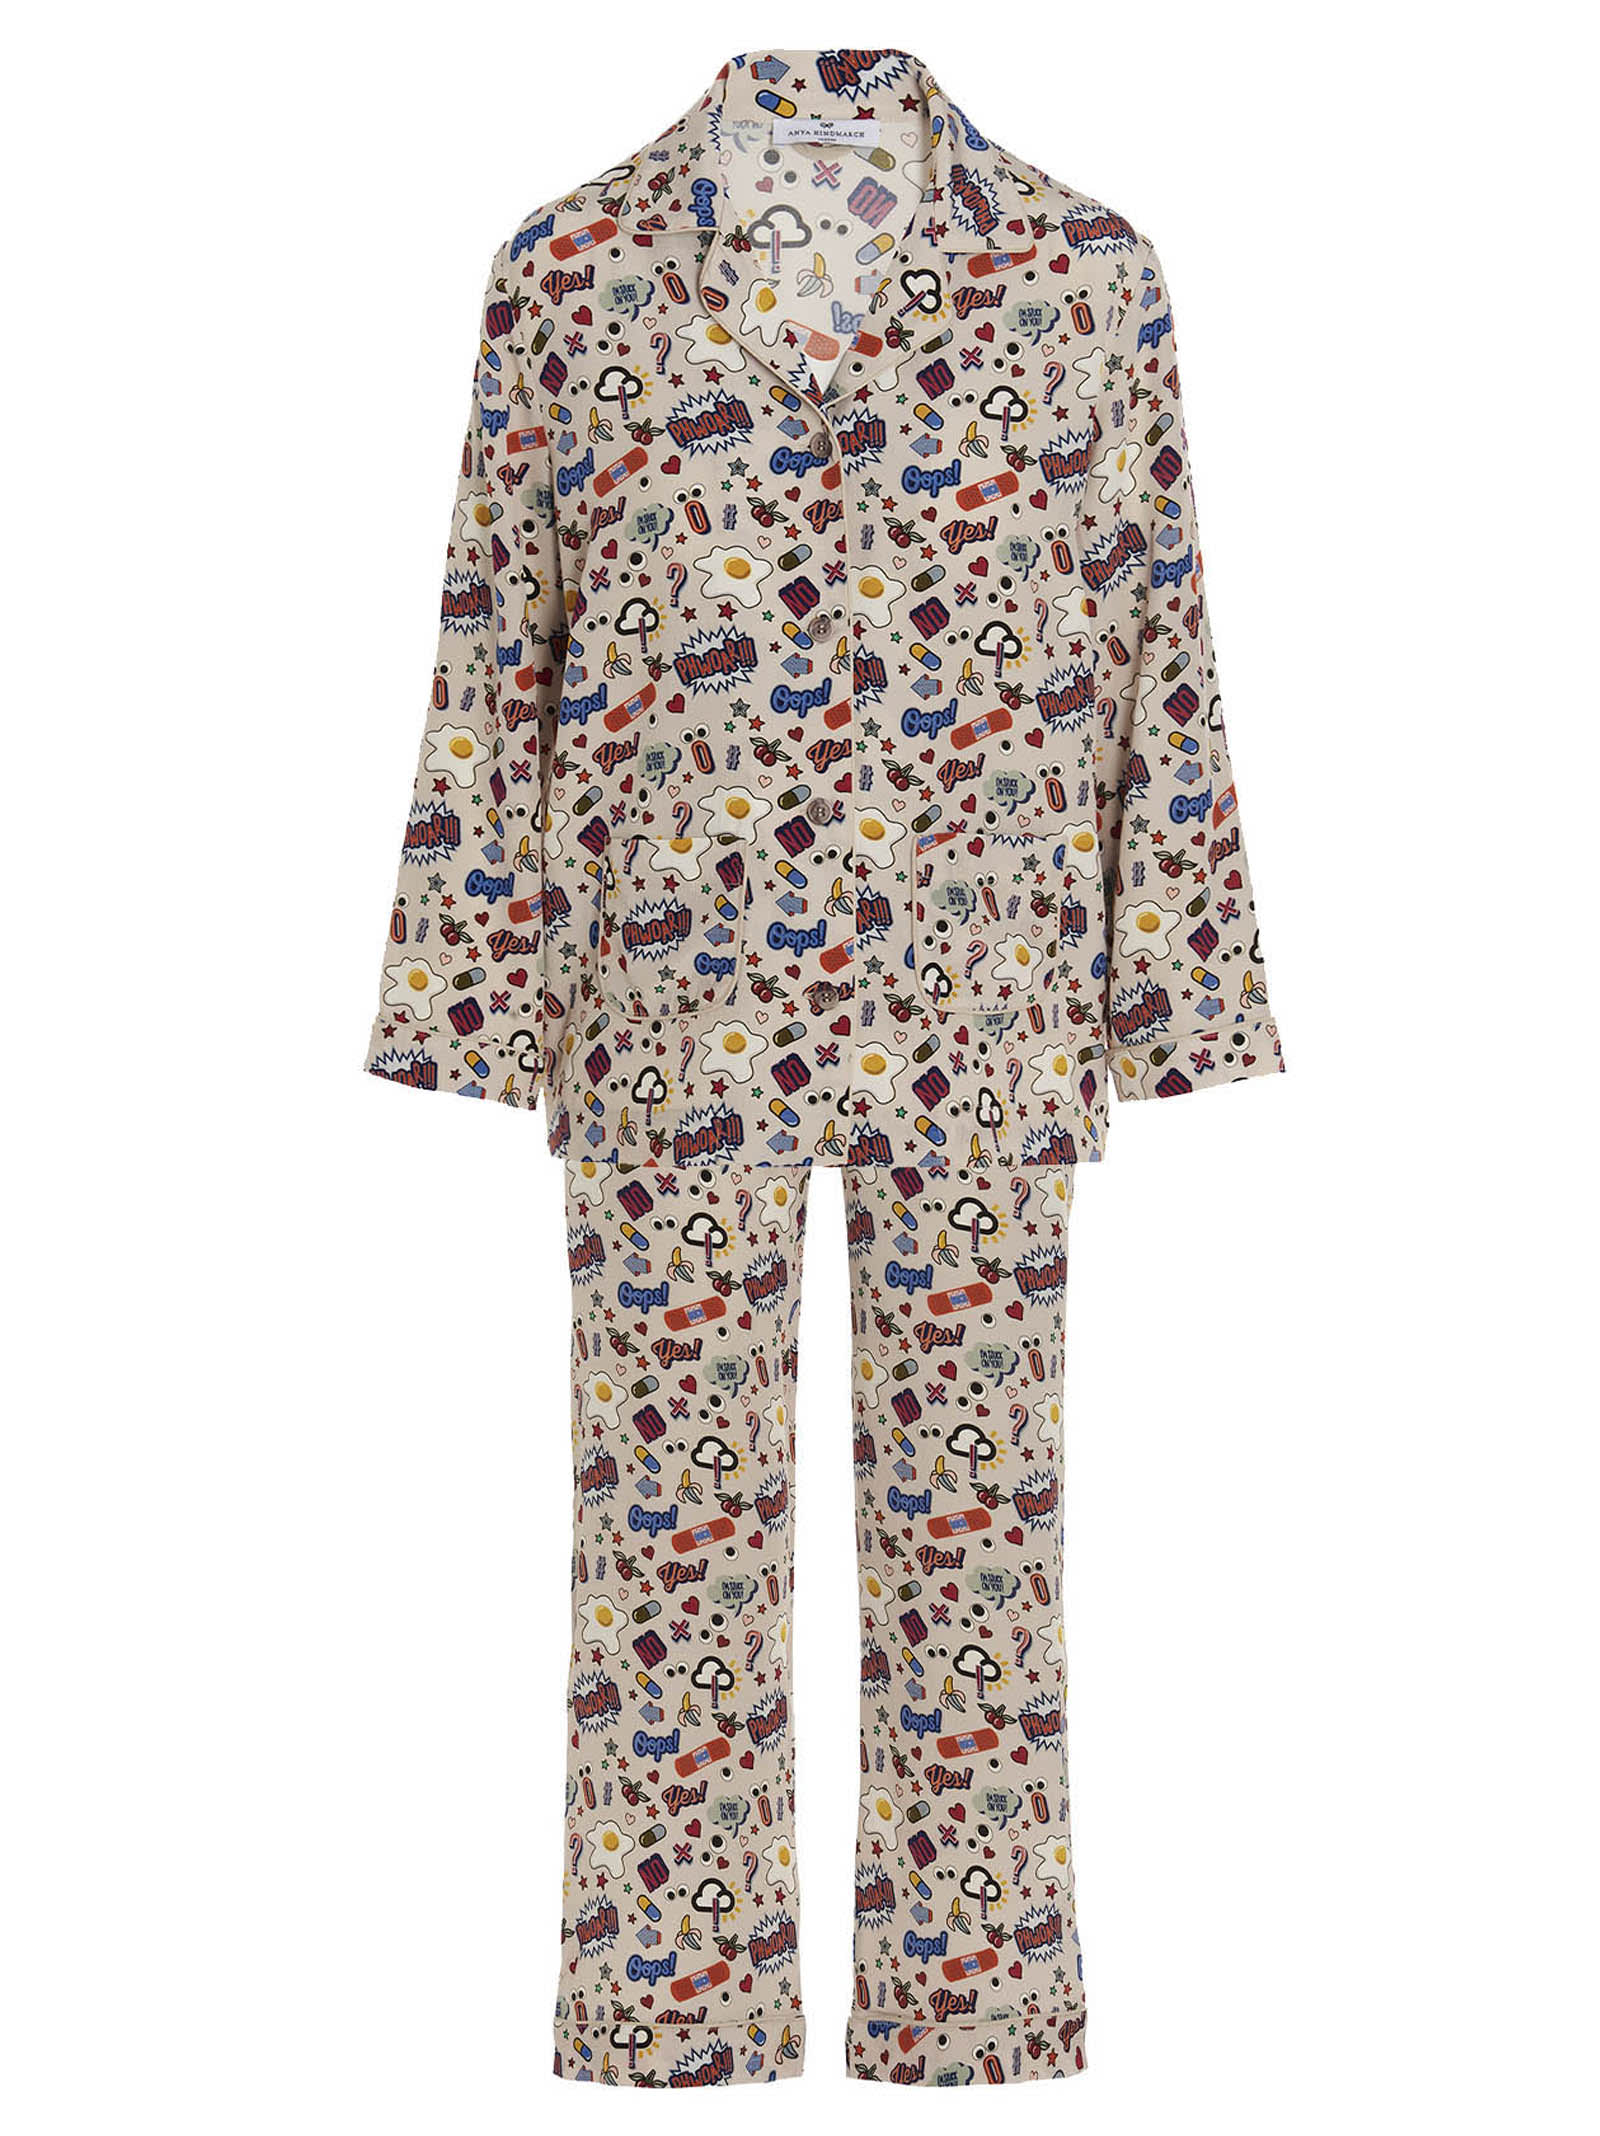 Anya Hindmarch Silk Pijama Featuring An All Over Print